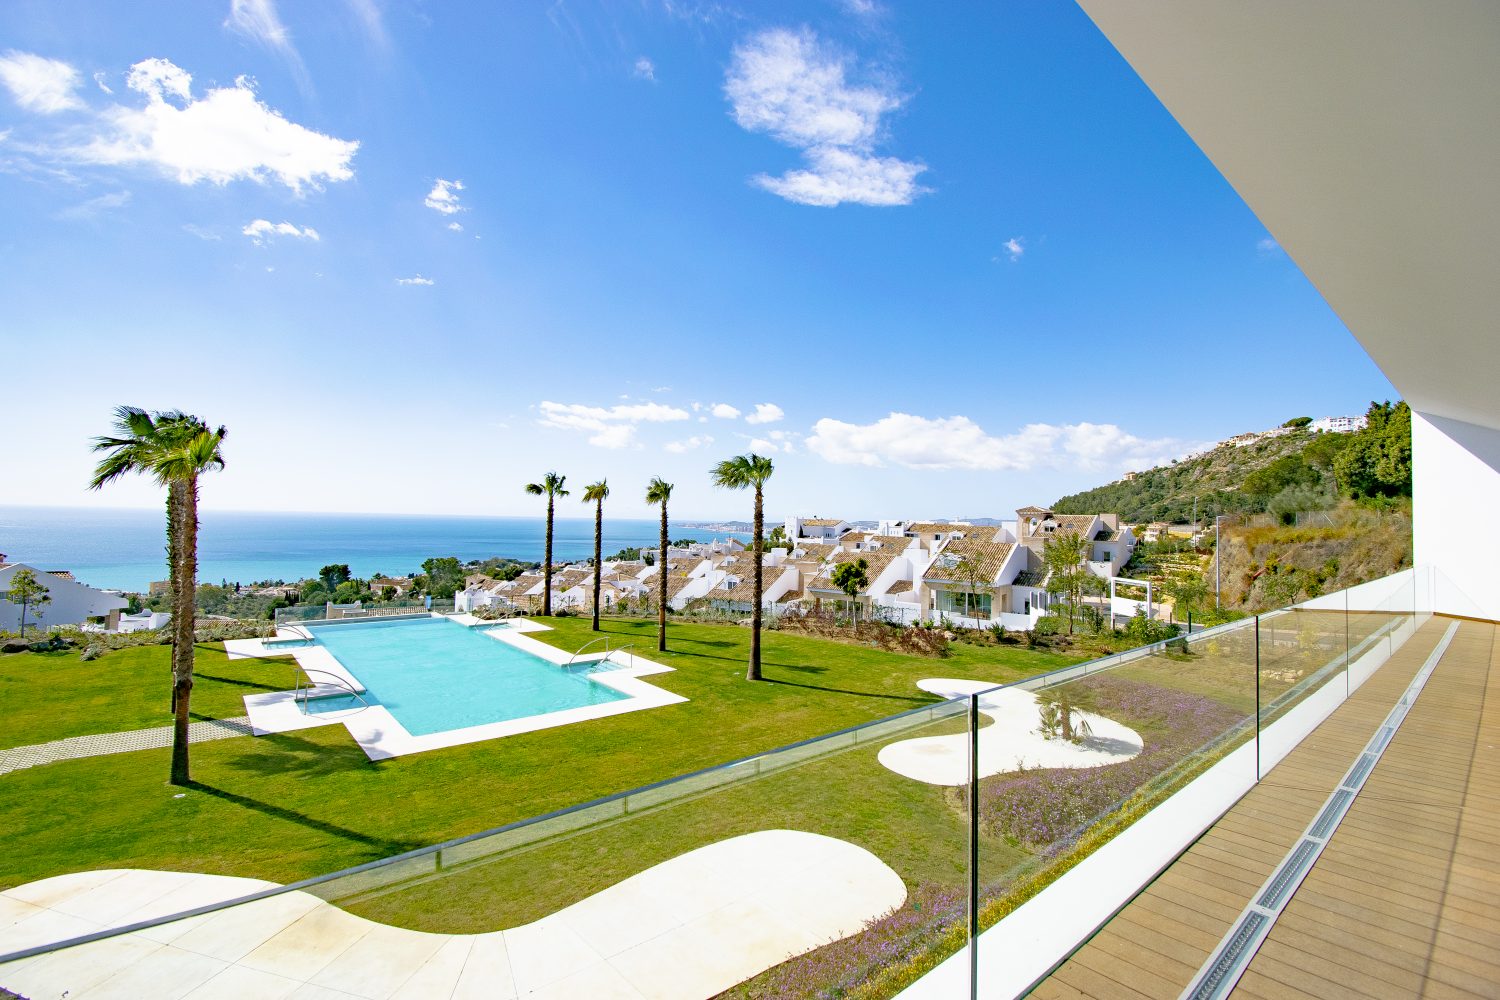 All villas feature stunning panoramic views of the Mediterranean Sea